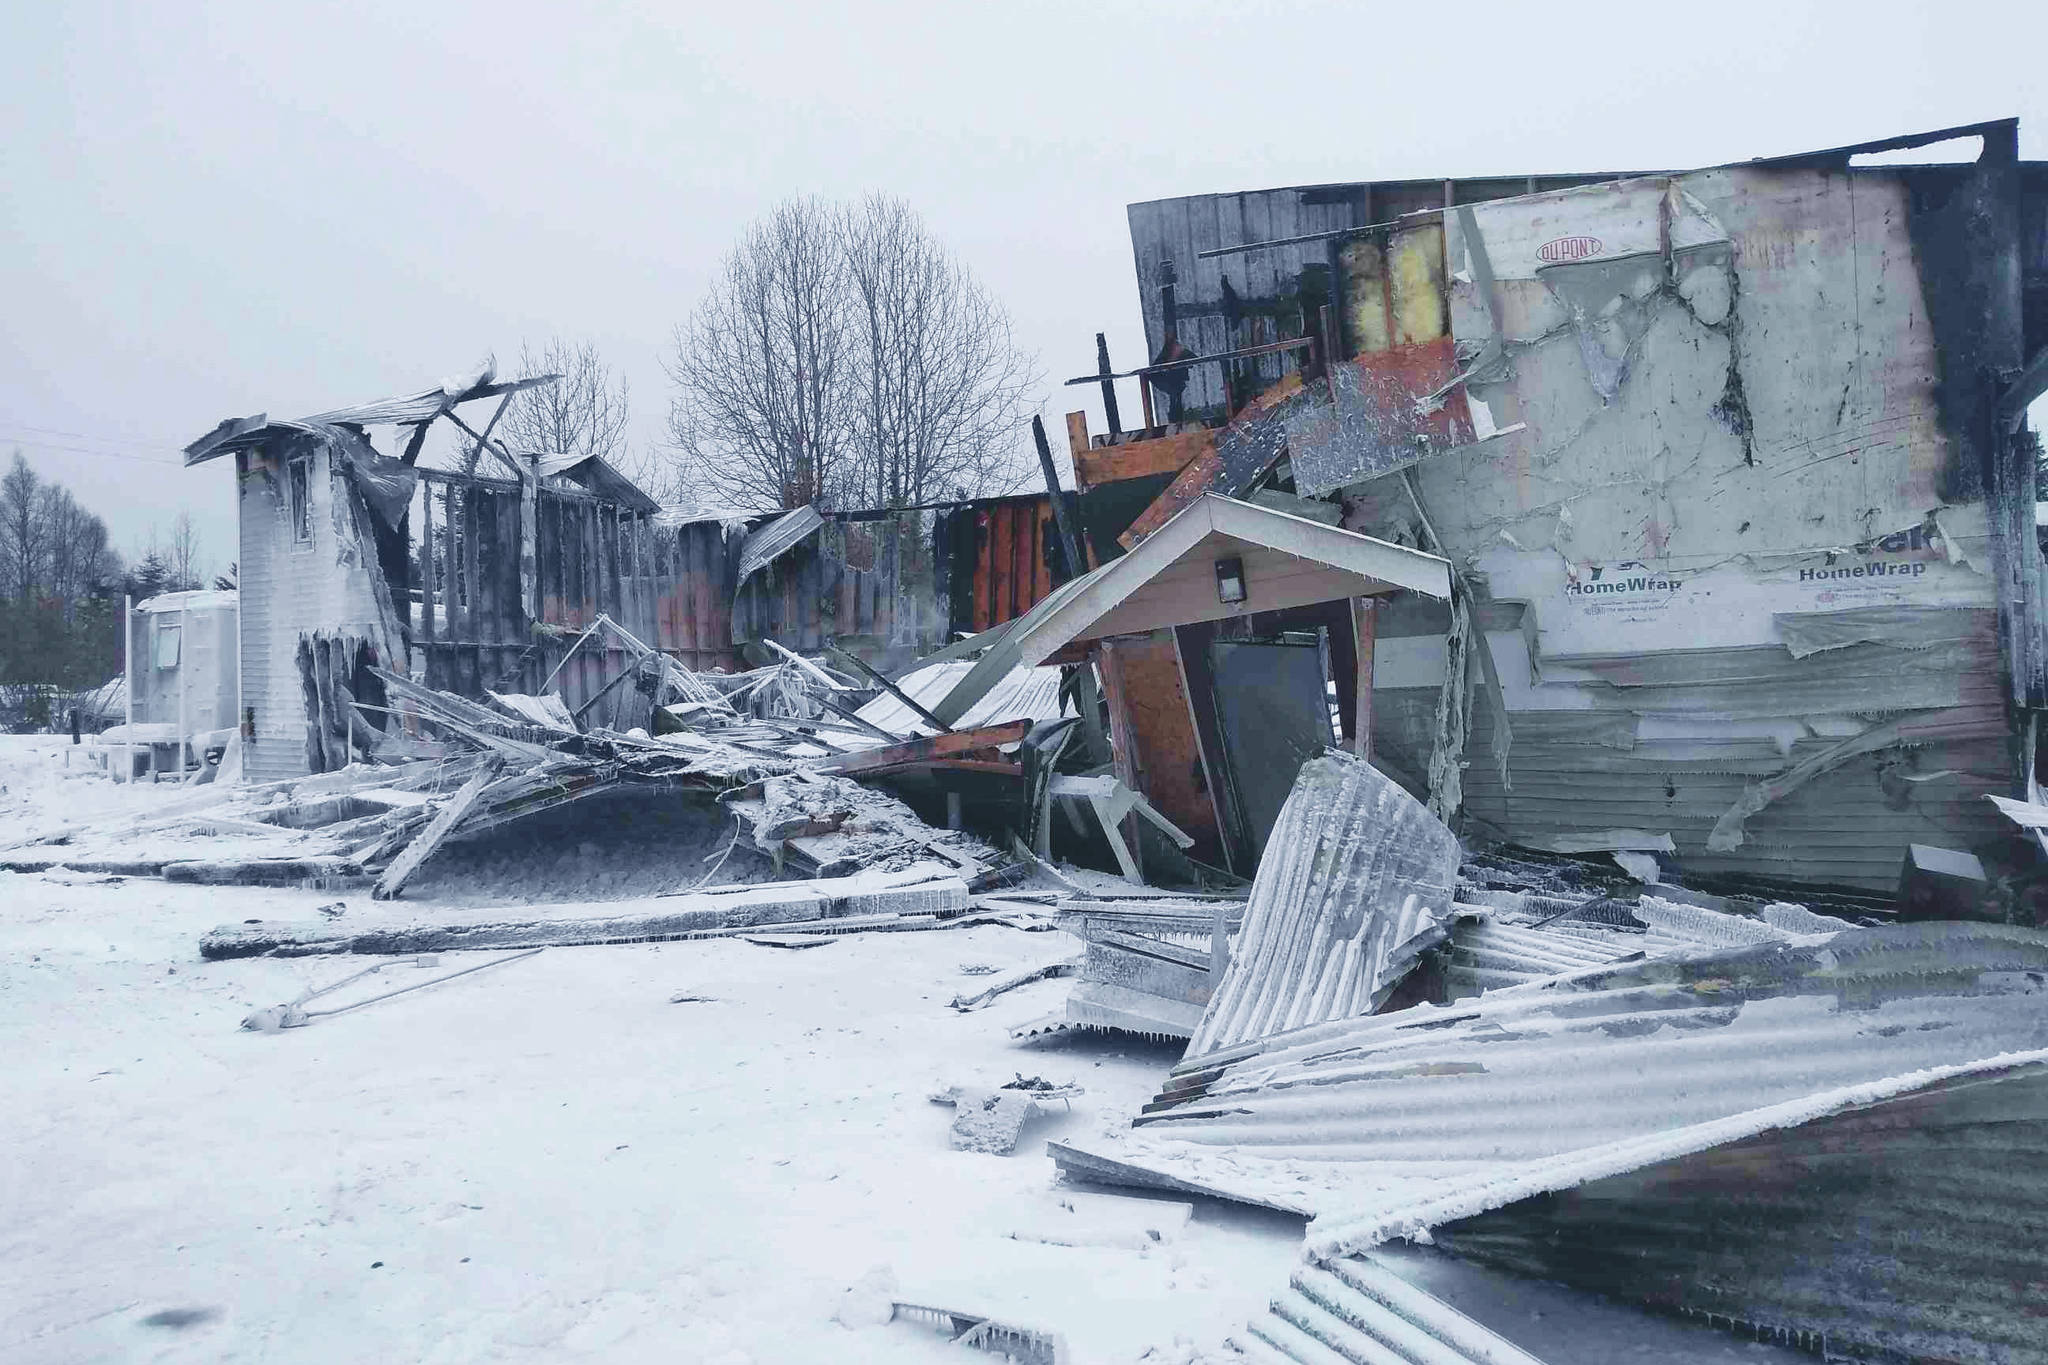 The collapsed remnants of the Triumvirate Theatre can be seen on Saturday, Feb. 20, 2021 in Nikiski, Alaska. The building burned down in an early morning fire on Saturday. (Photo courtesy of Joe Rizzo)